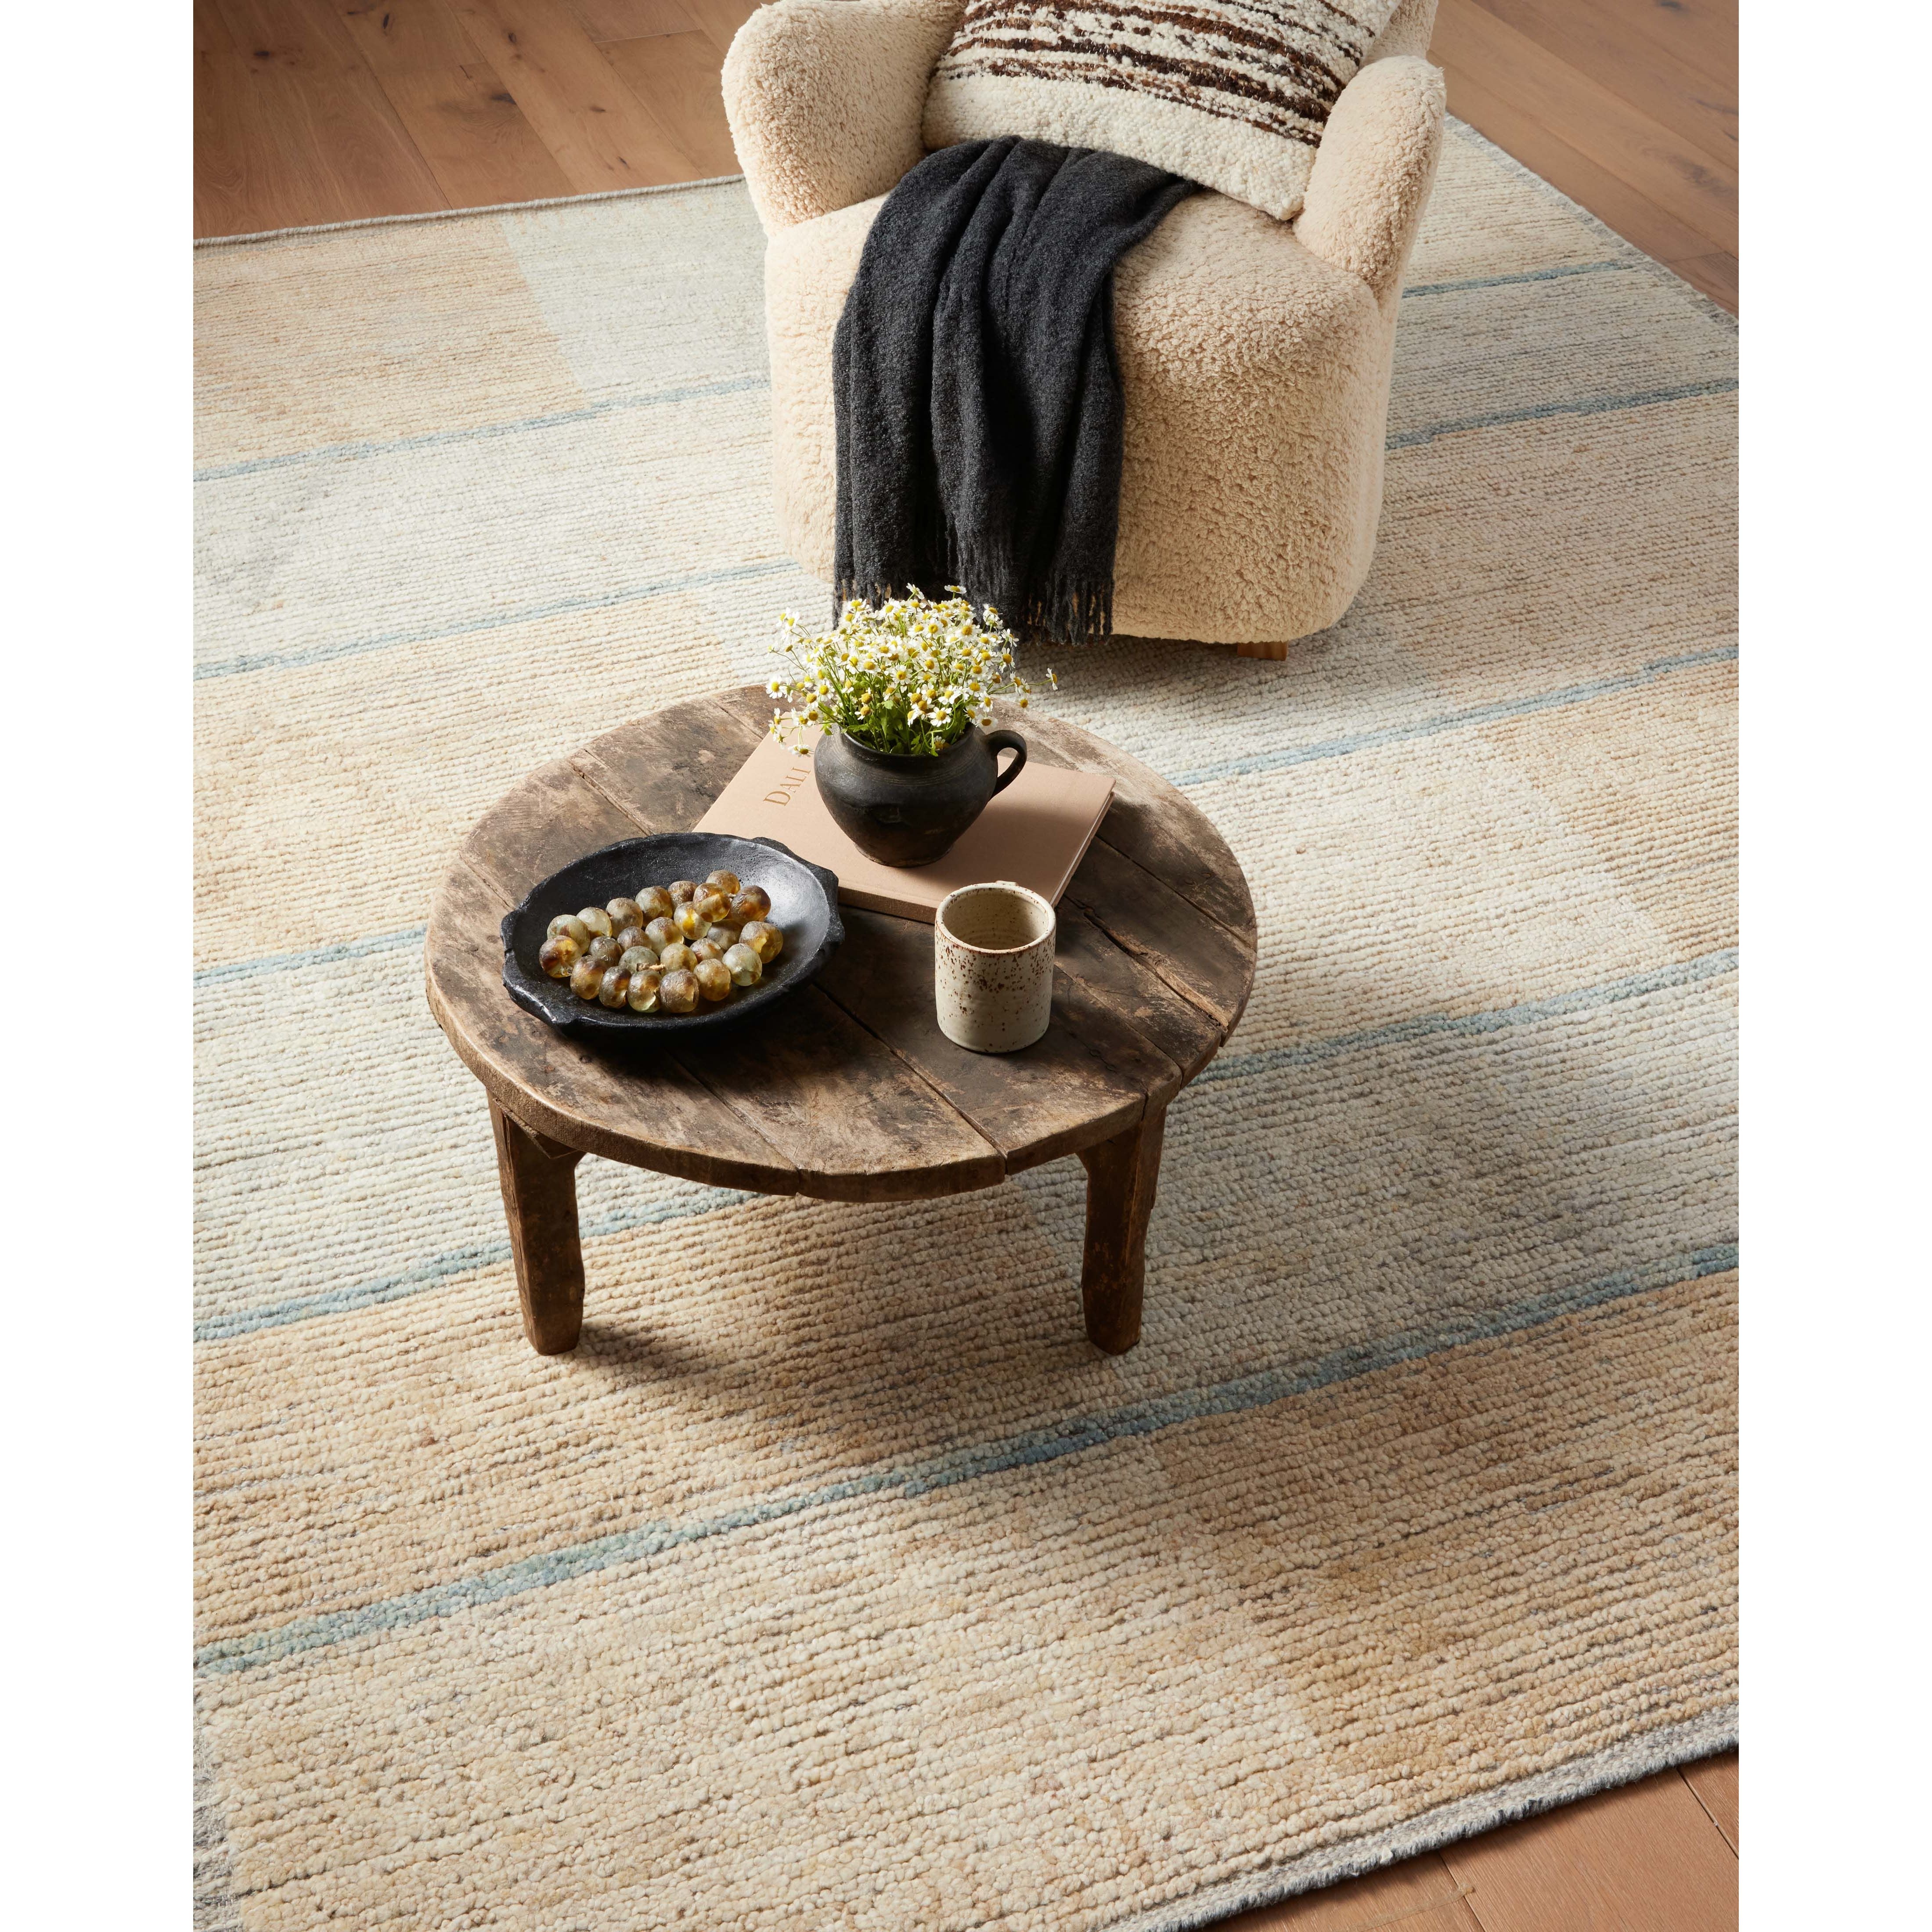 Amber Lewis x Loloi Briyana Sky / Wheat Rug combines the incredible ribbed texture of Moroccan rugs with clean, contemporary design, thanks to Lewis’s careful eye for details. Amethyst Home provides interior design services, furniture, rugs, and lighting in the Dallas metro area.